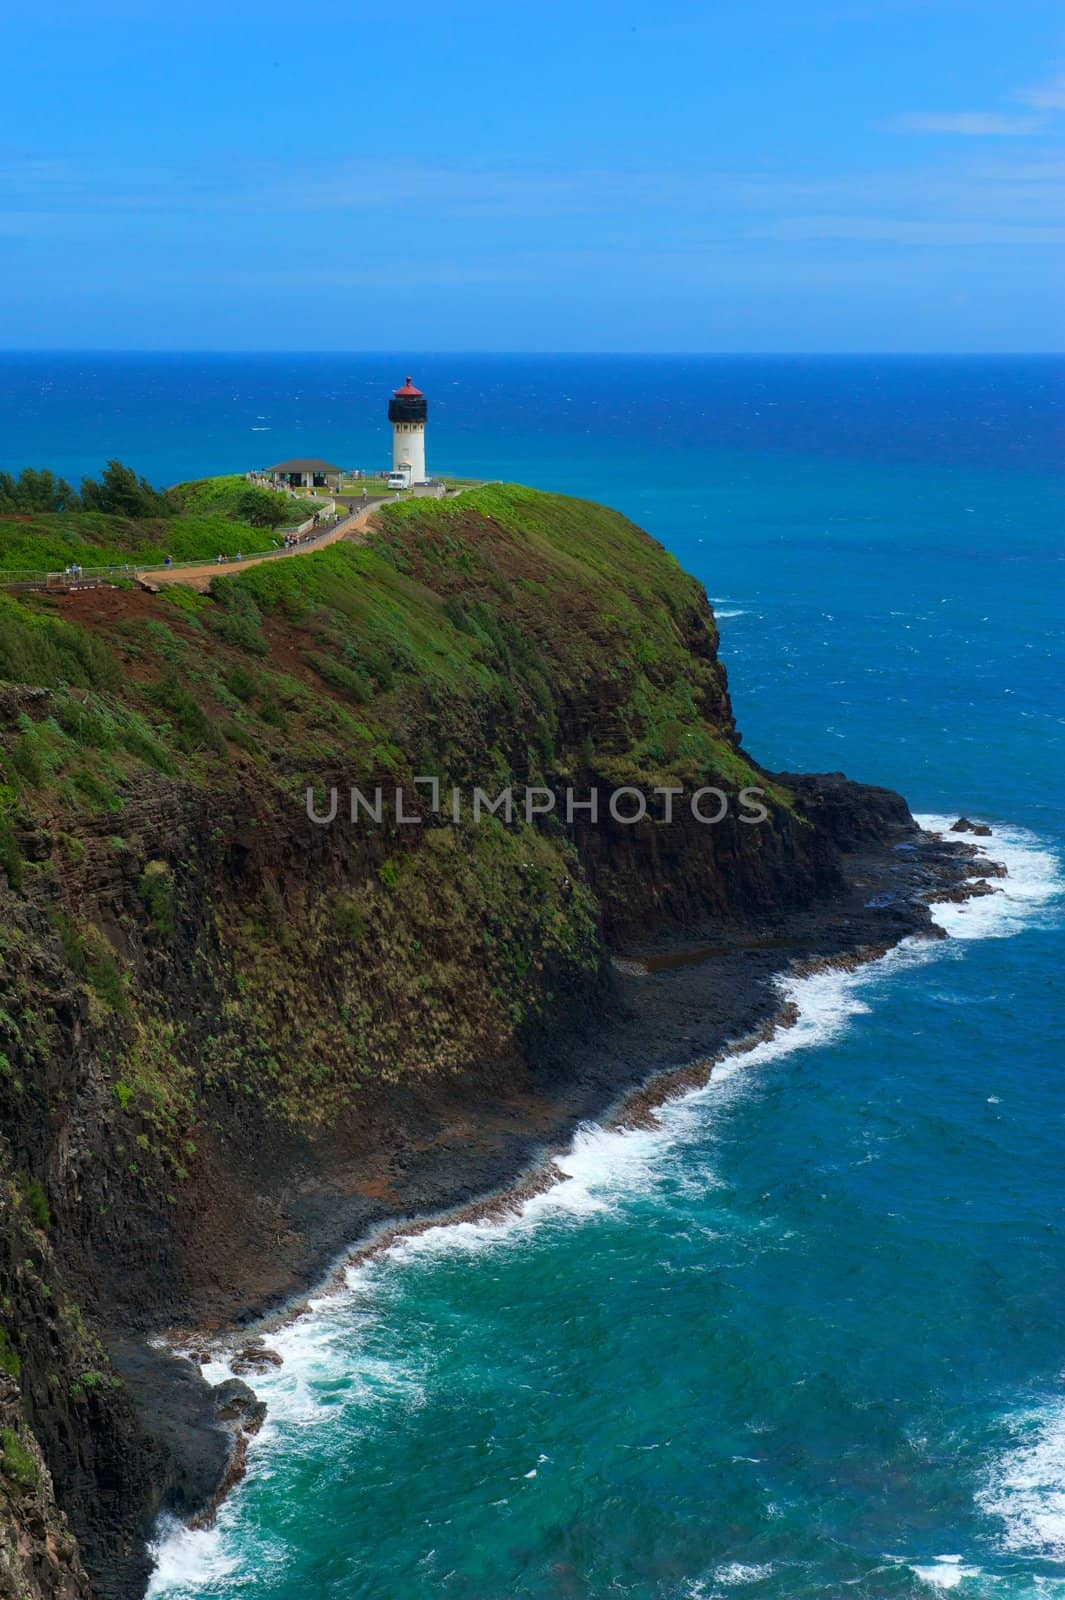 A lighthouse atop a rock formation on the northern shore of island of Kauai, Hawaii, USA